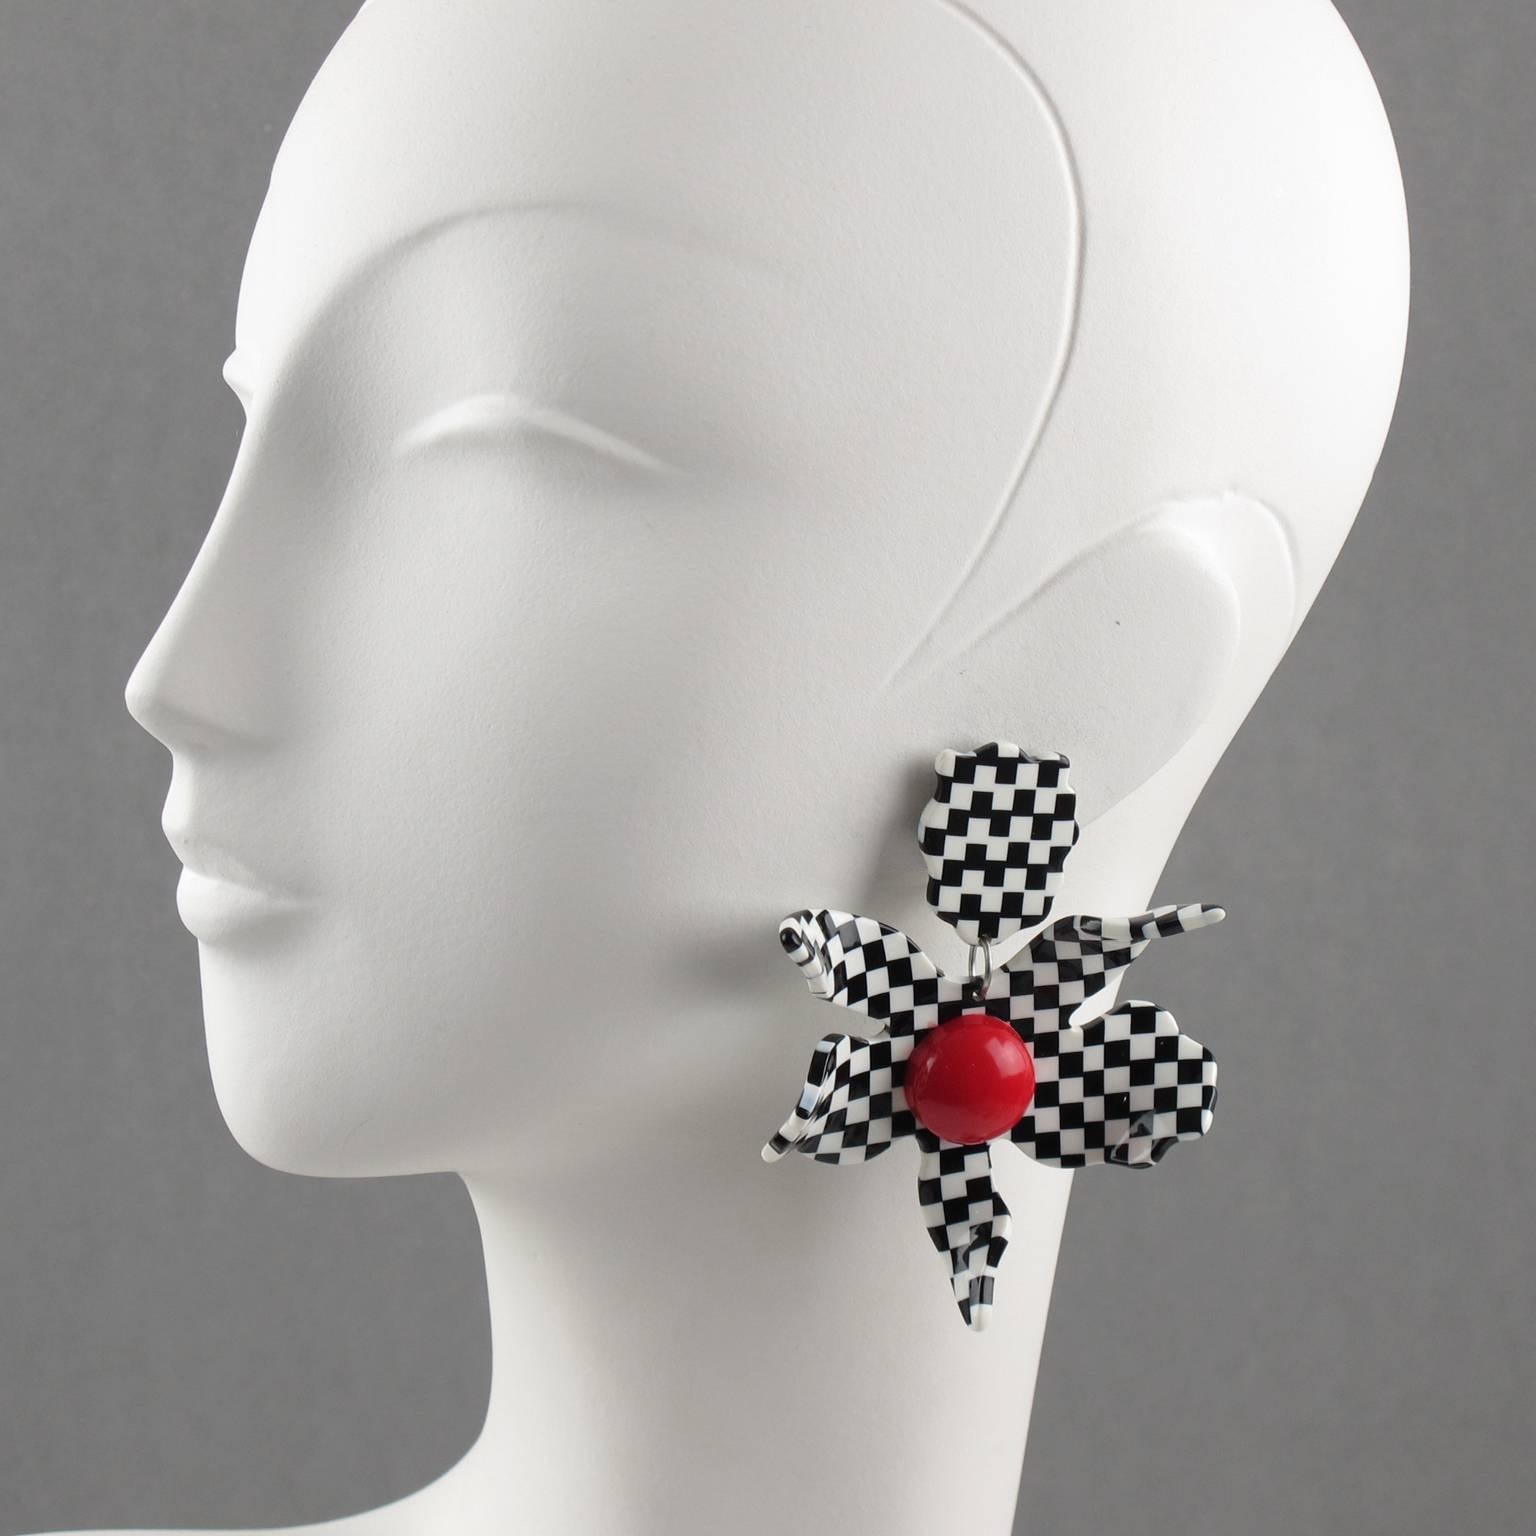 Stunning oversized lucite clip on earrings designed by Harriet Bauknight for Kaso. Dimensional large flower with black and white checkerboard pattern and huge red half bead center. Unsigned but specific clip back and design are unmistakable brand